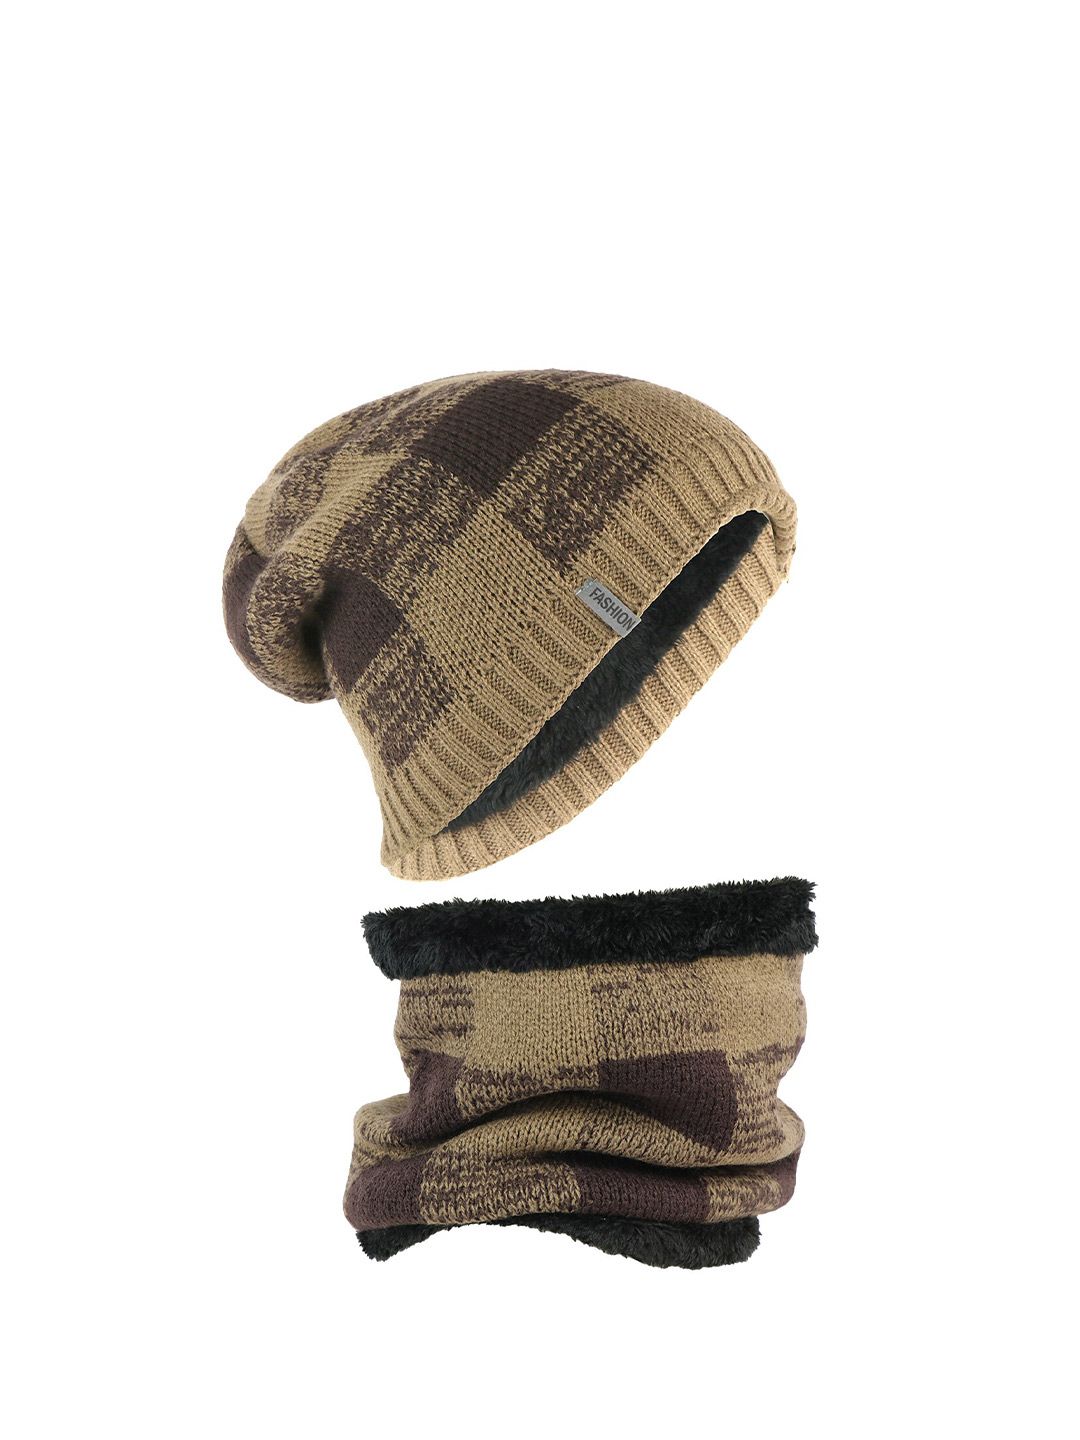 iSWEVEN Beige Woolen Beanie with Neck Warmer Price in India